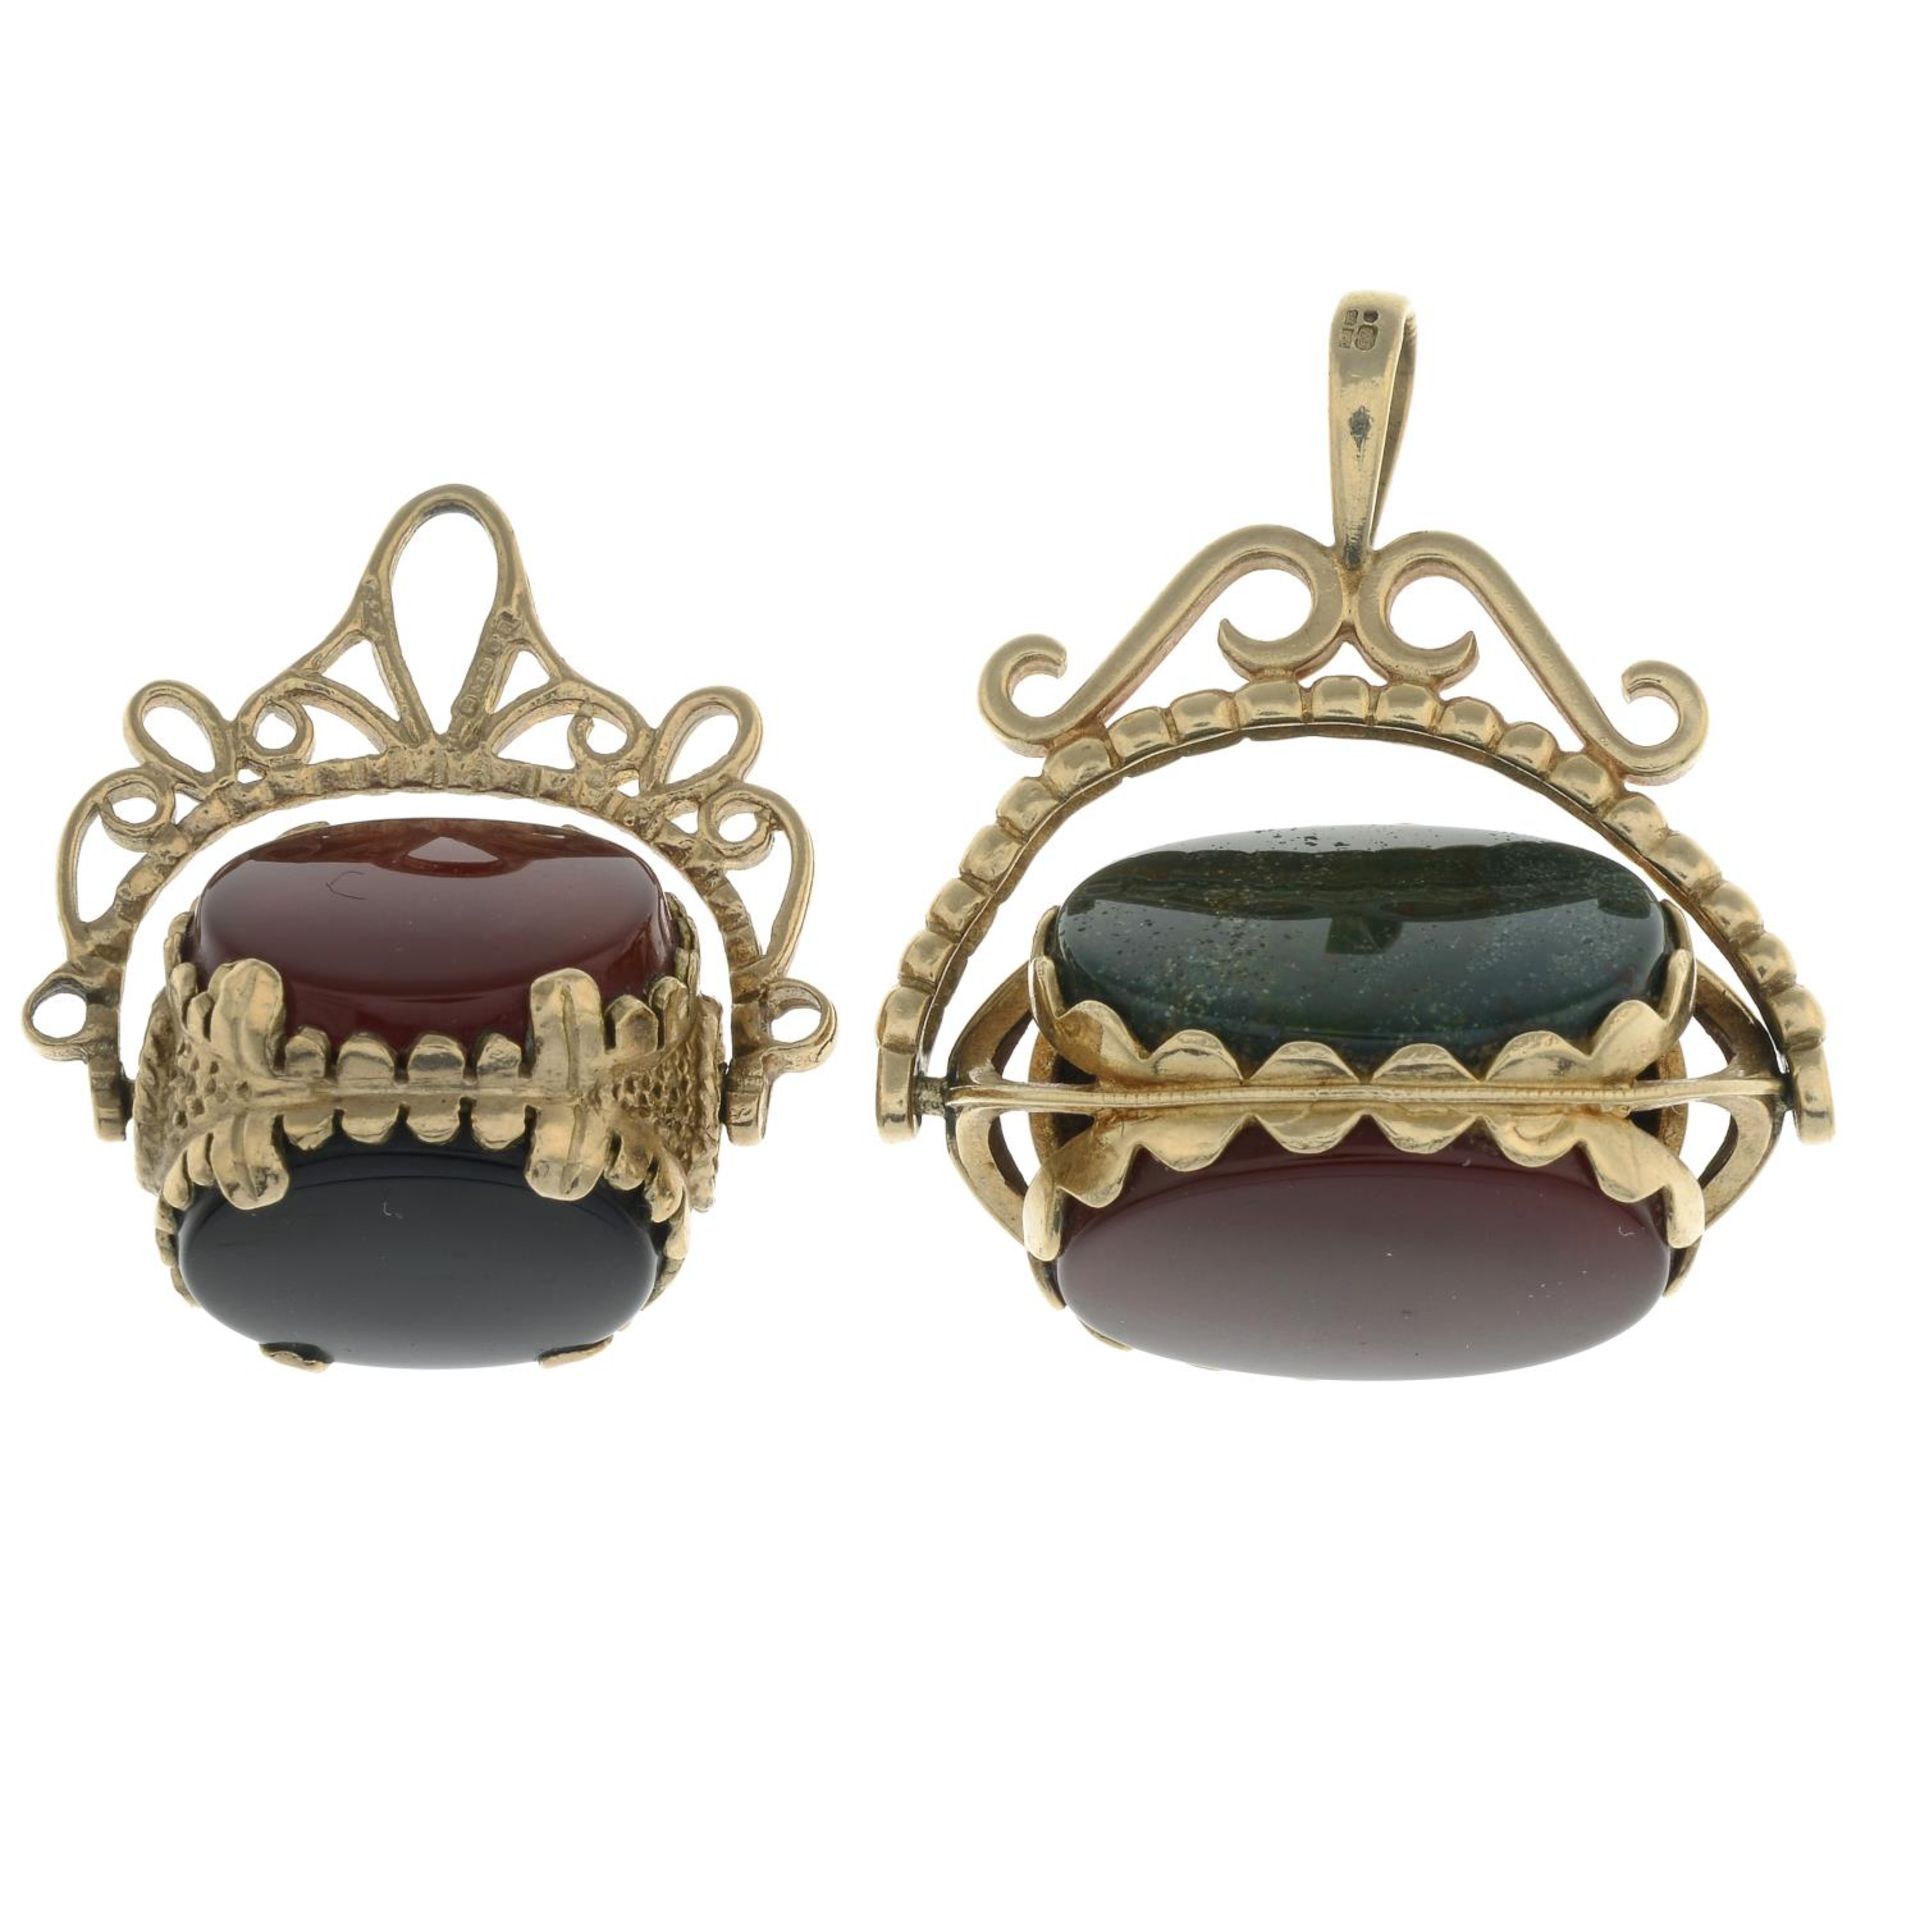 Two 9ct gold hardstone swivel fobs.